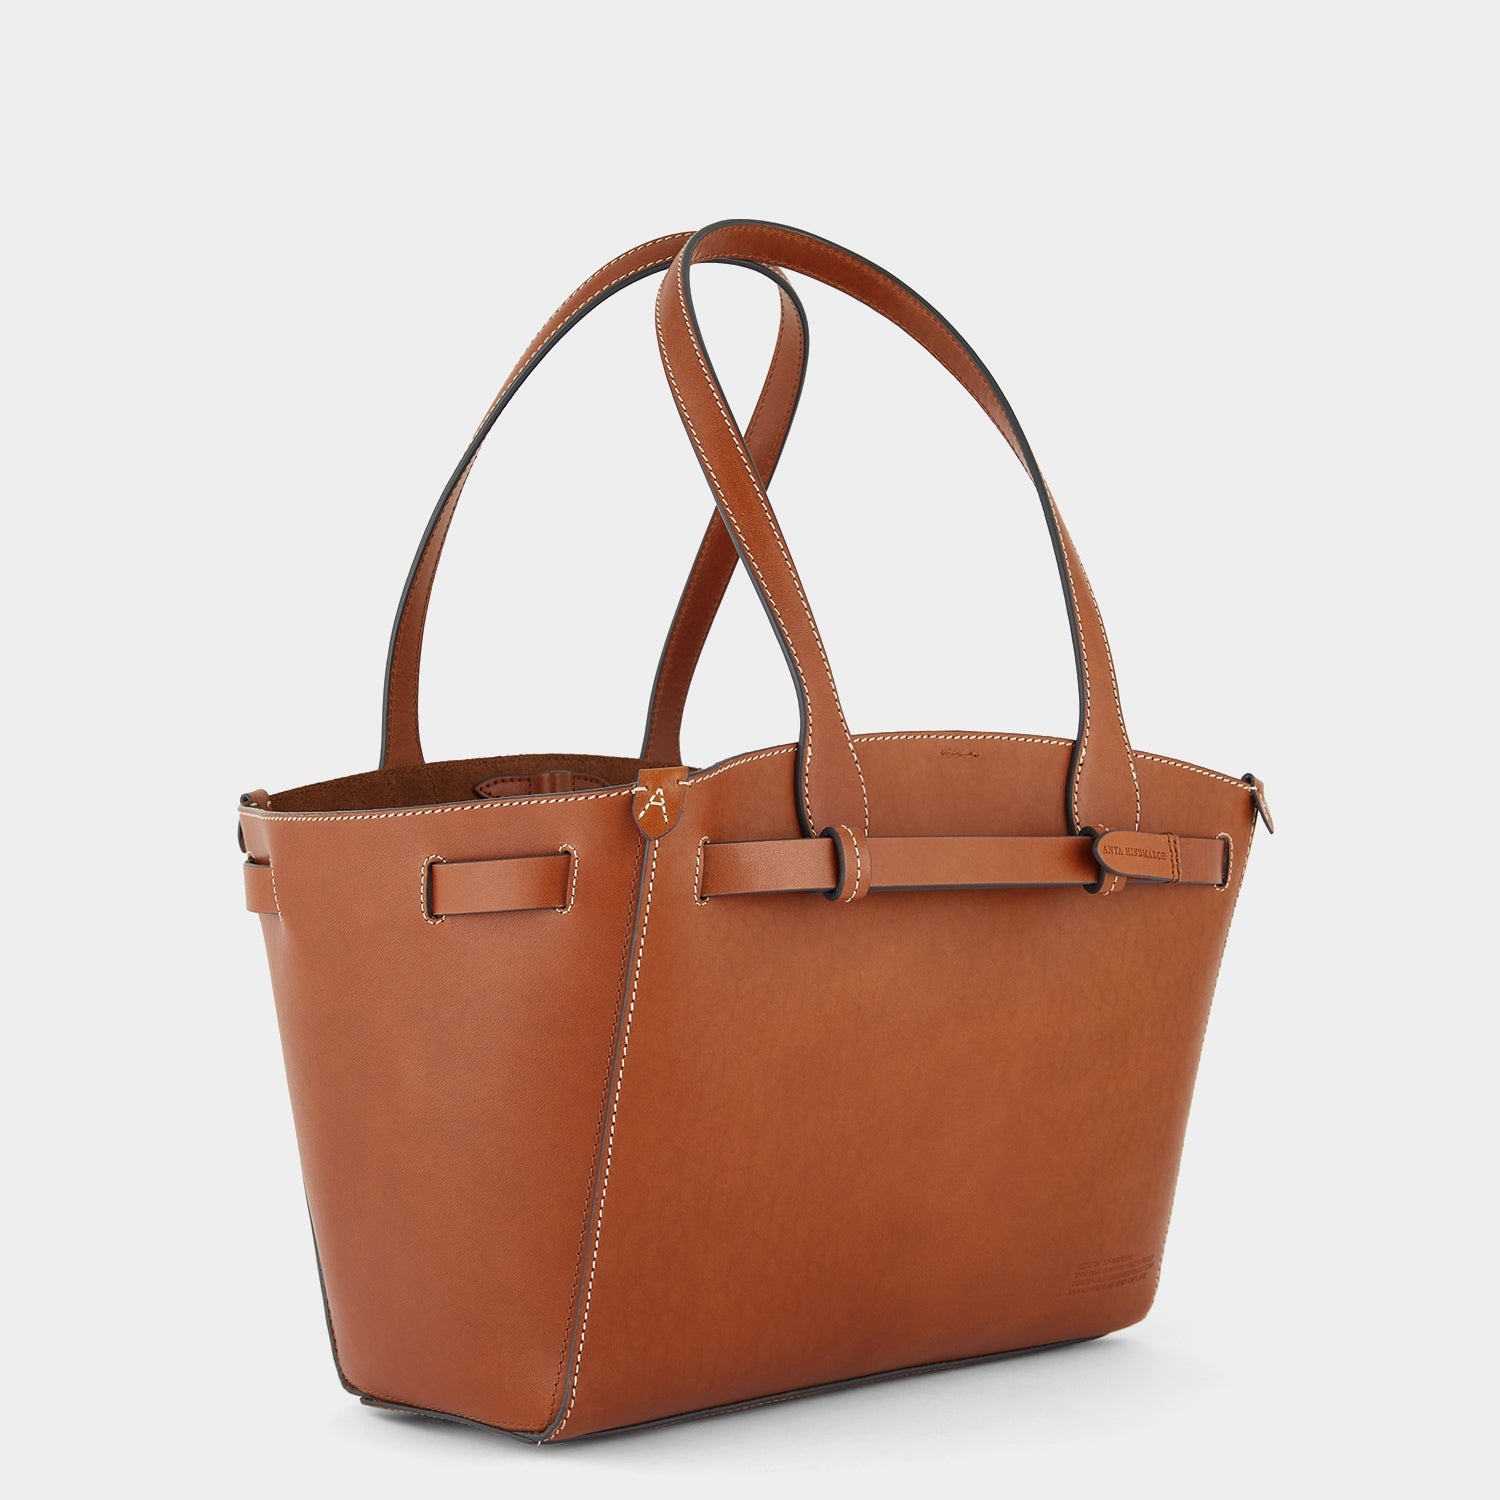 Return to Nature Tote Small -

                  
                    Compostable Leather in Tan -
                  

                  Anya Hindmarch EU
